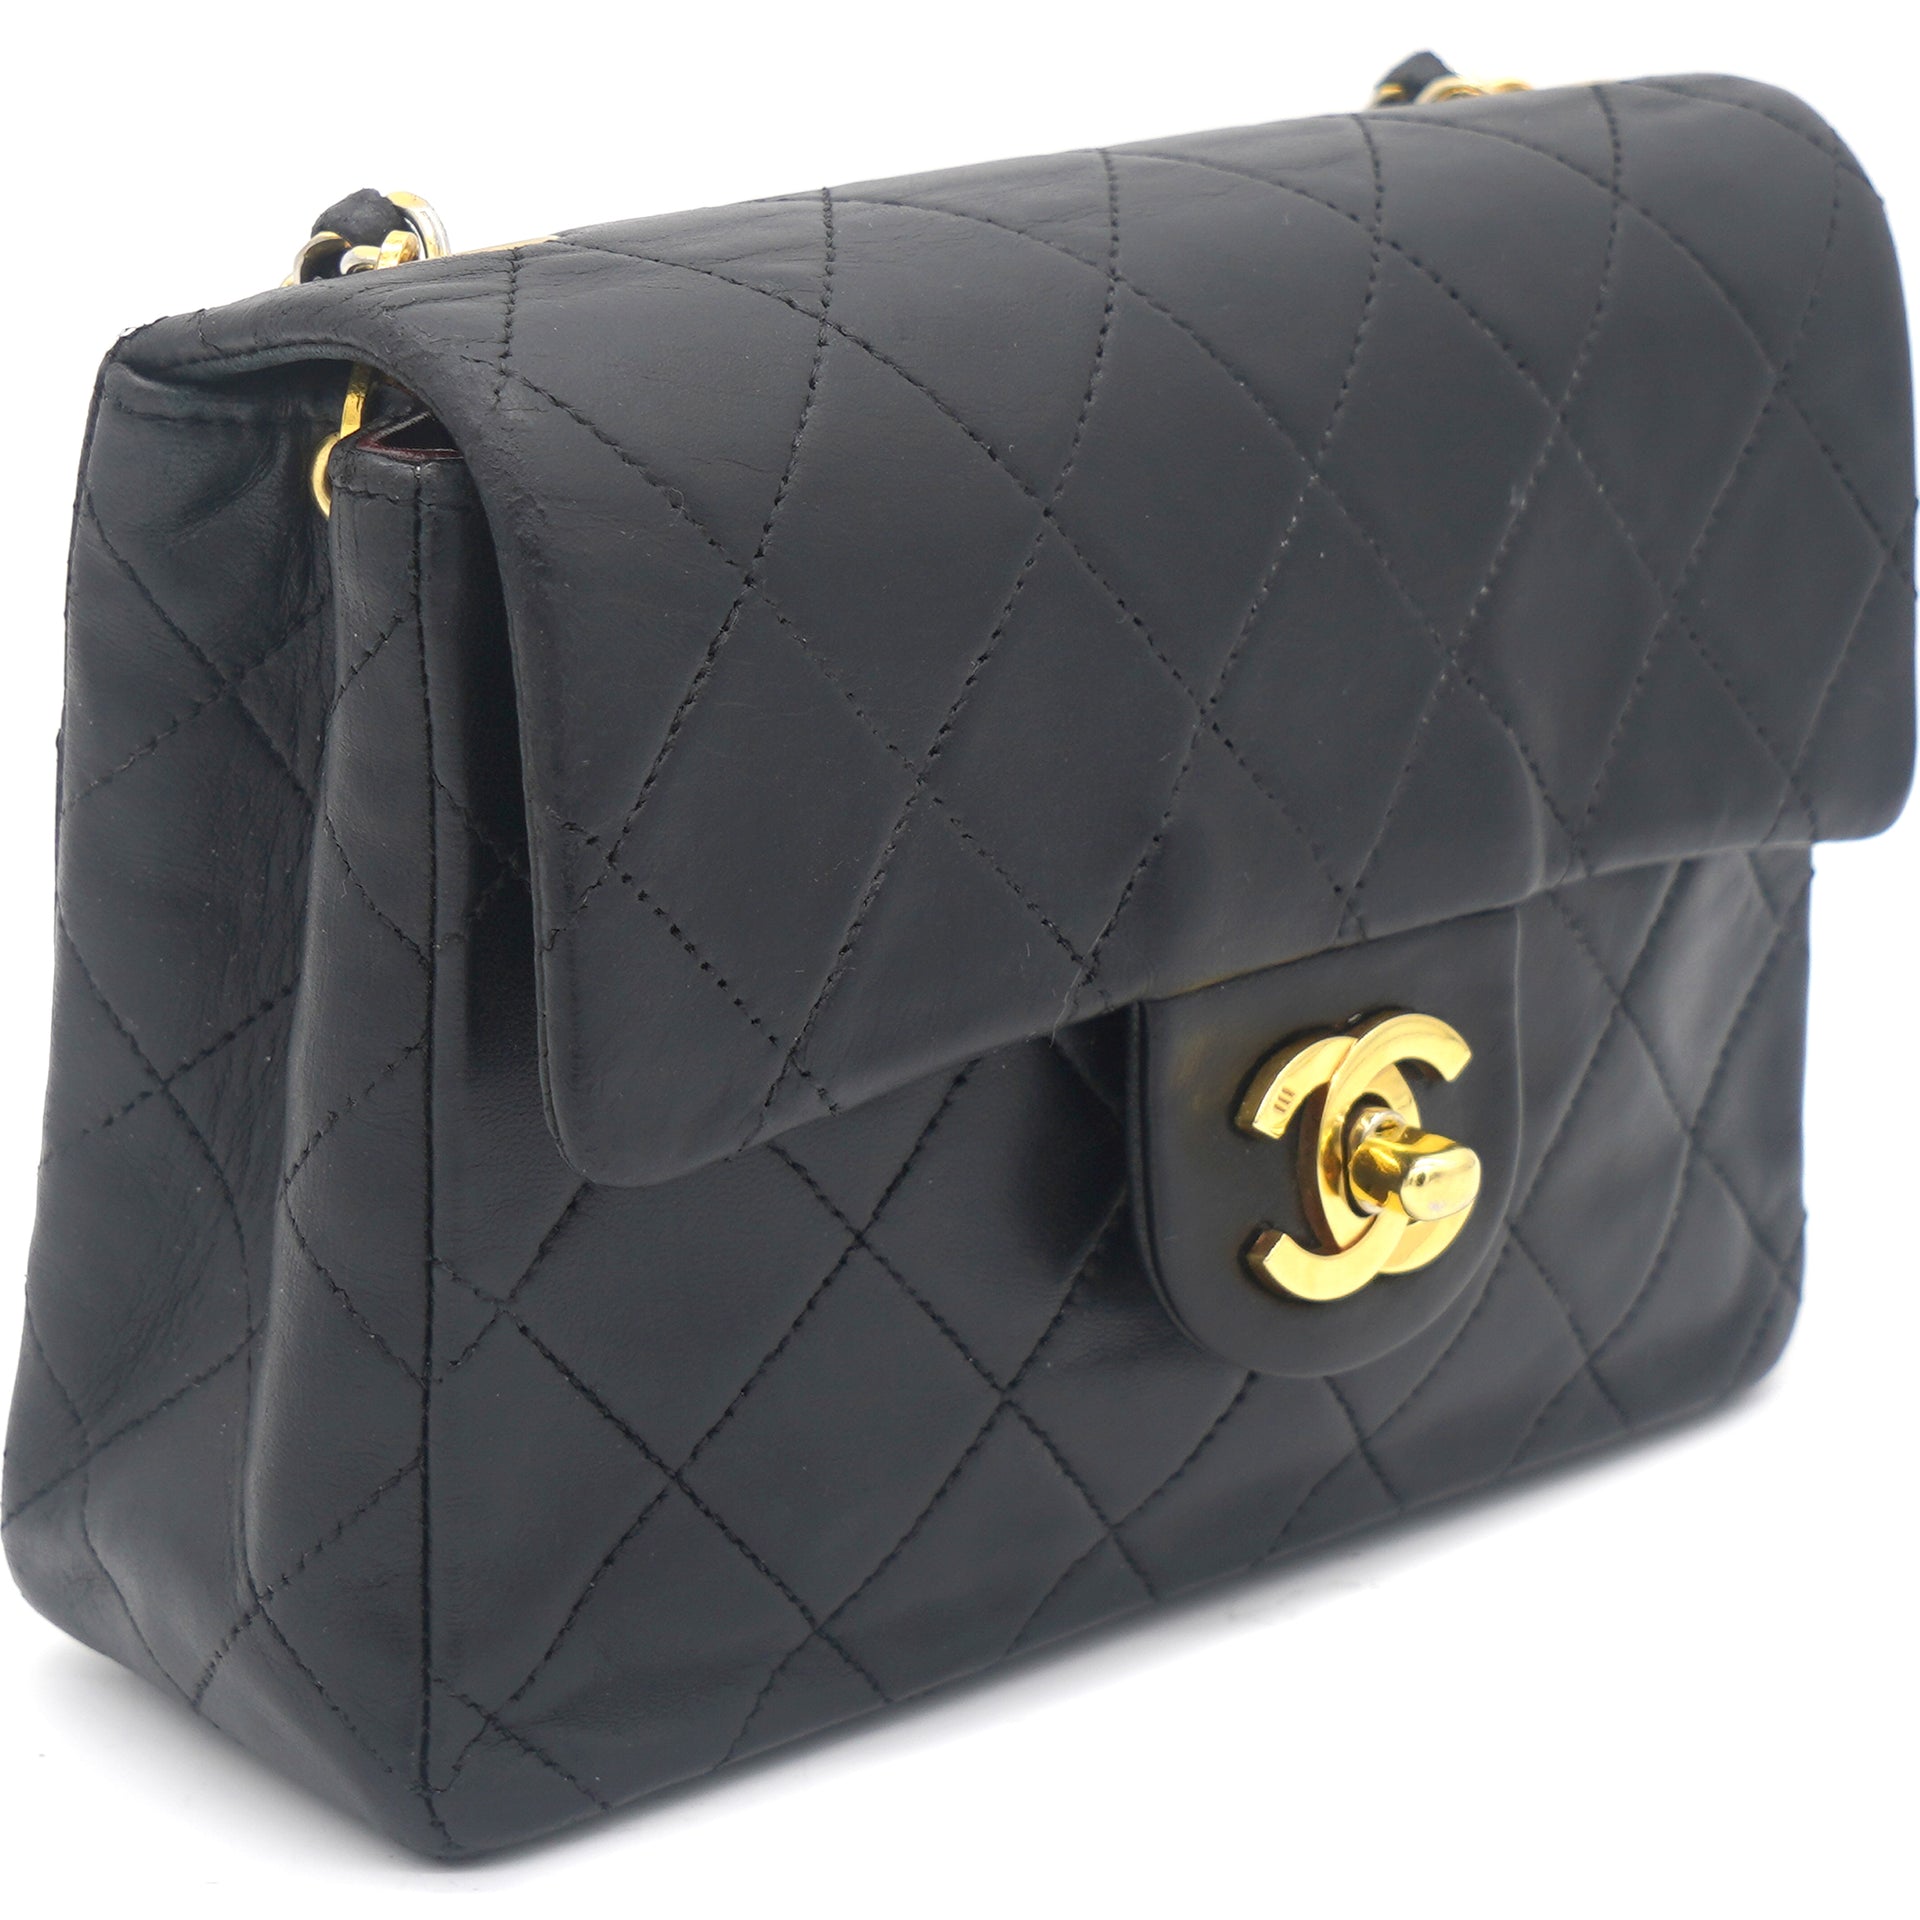 Chanel Black Quilted Rare Mini Classic Patent Flap Bag Silver